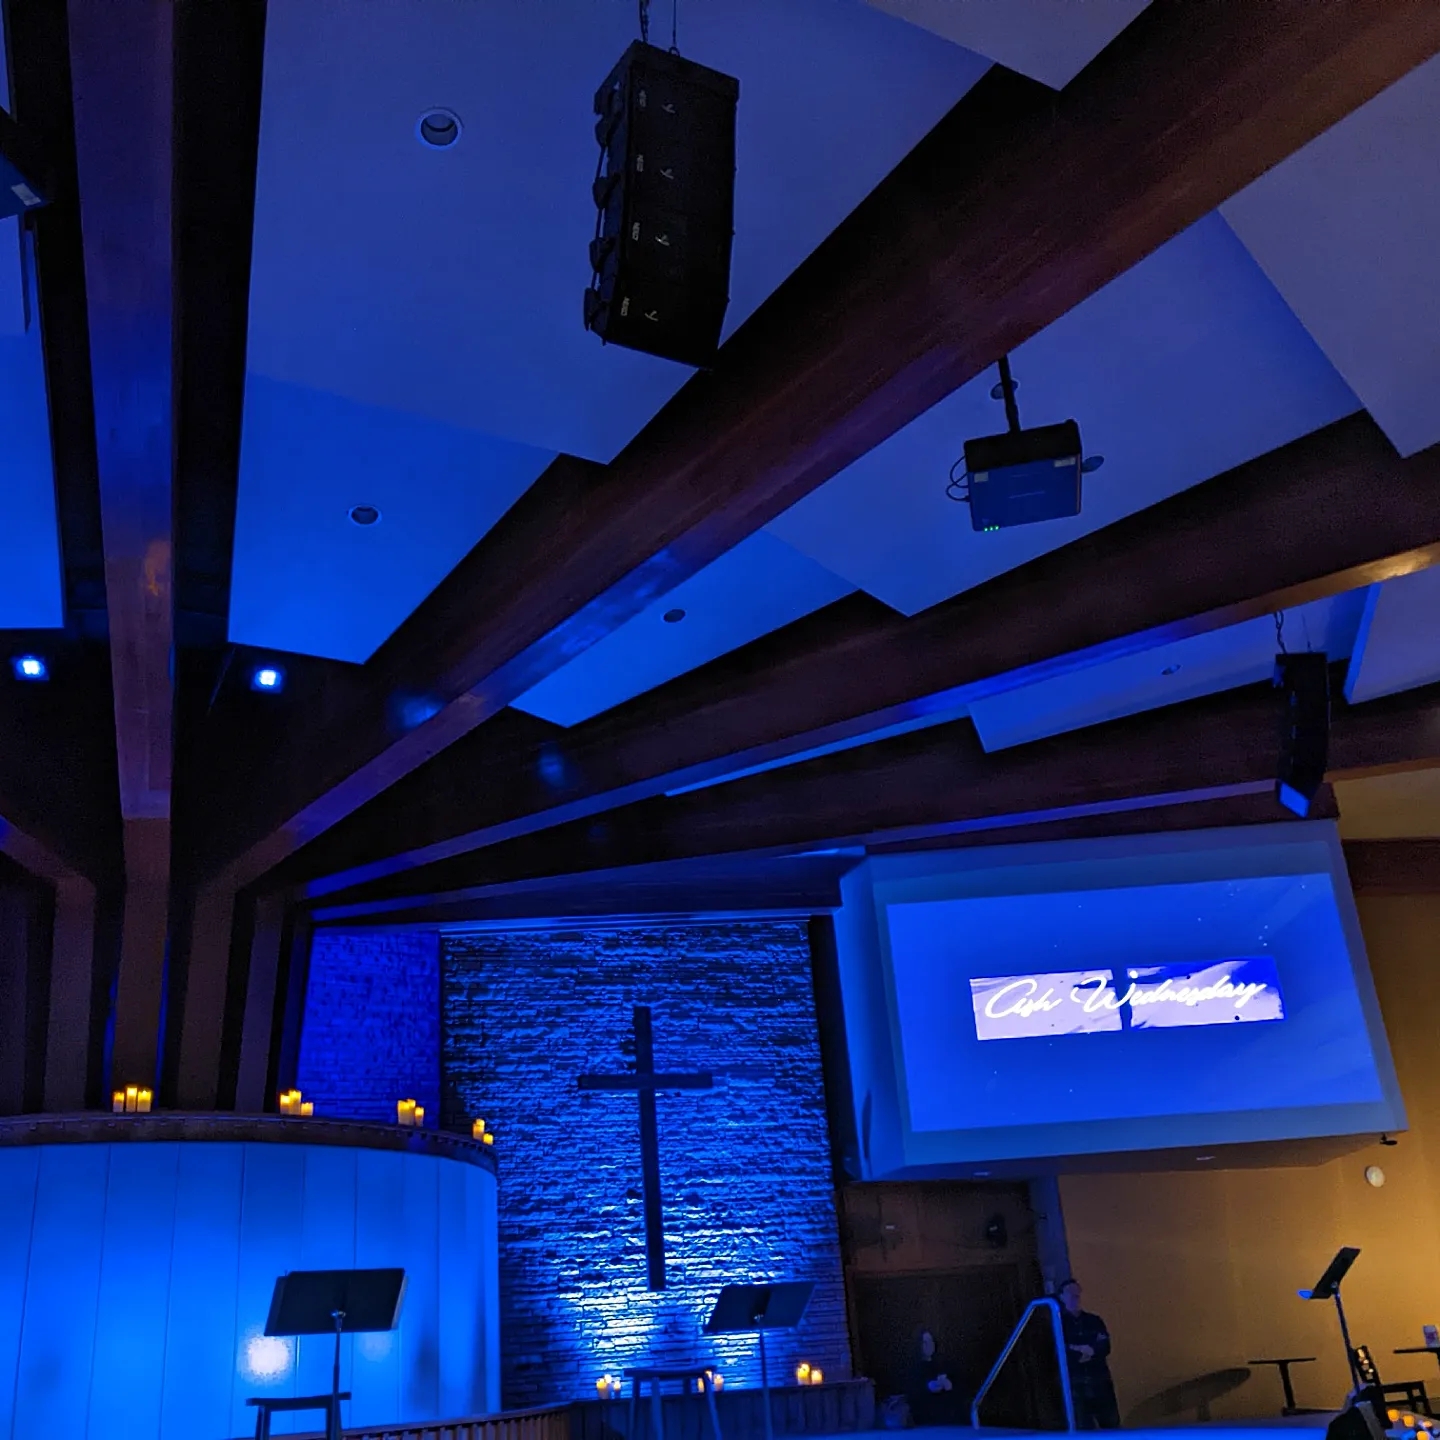 Church auditorium with words "Ash Wednesday" on screen